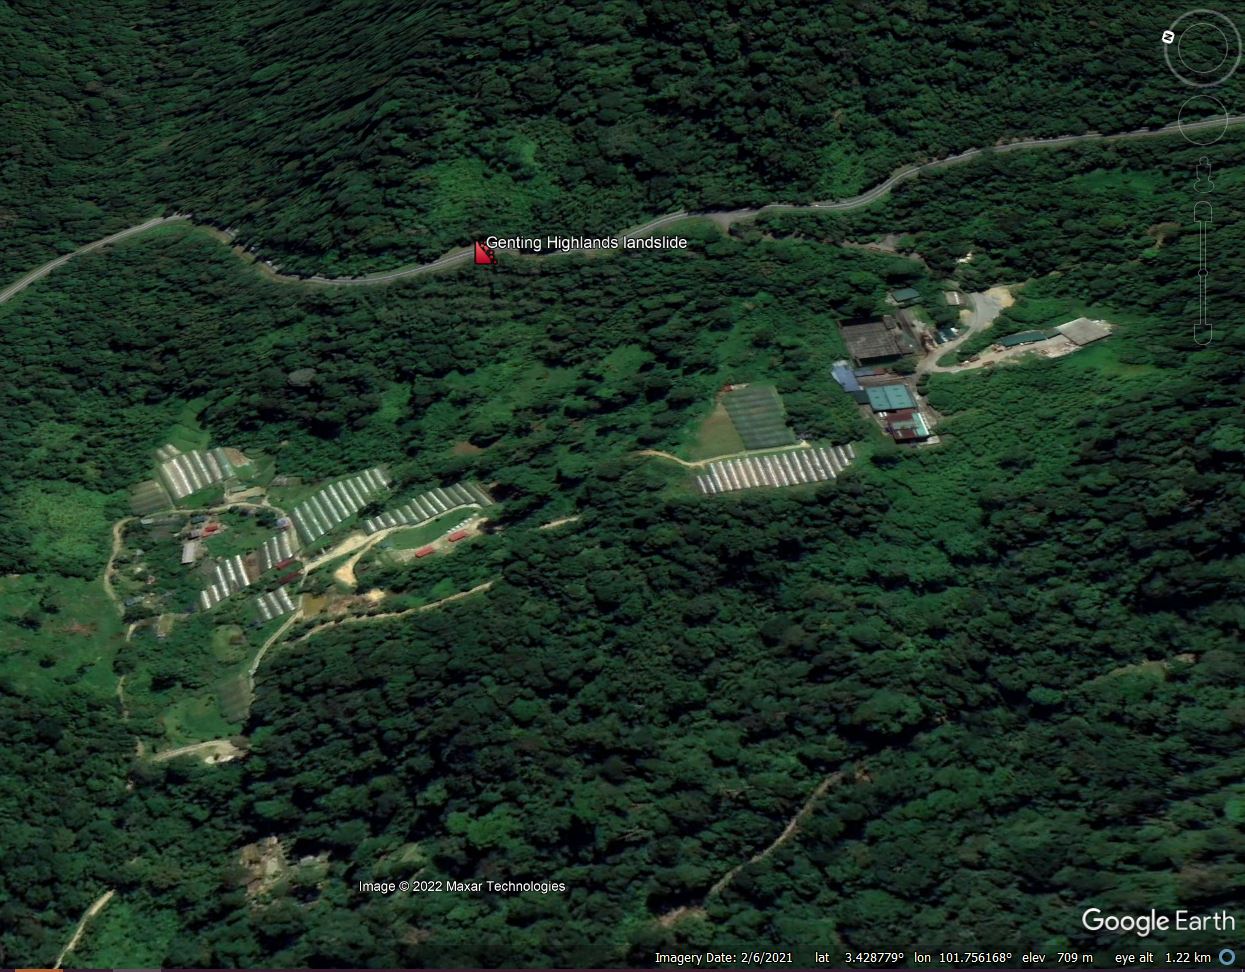 Google Earth image of my interpretation of the site of the 16 December 2022 landslide at Genting Highlands in Malaysia.